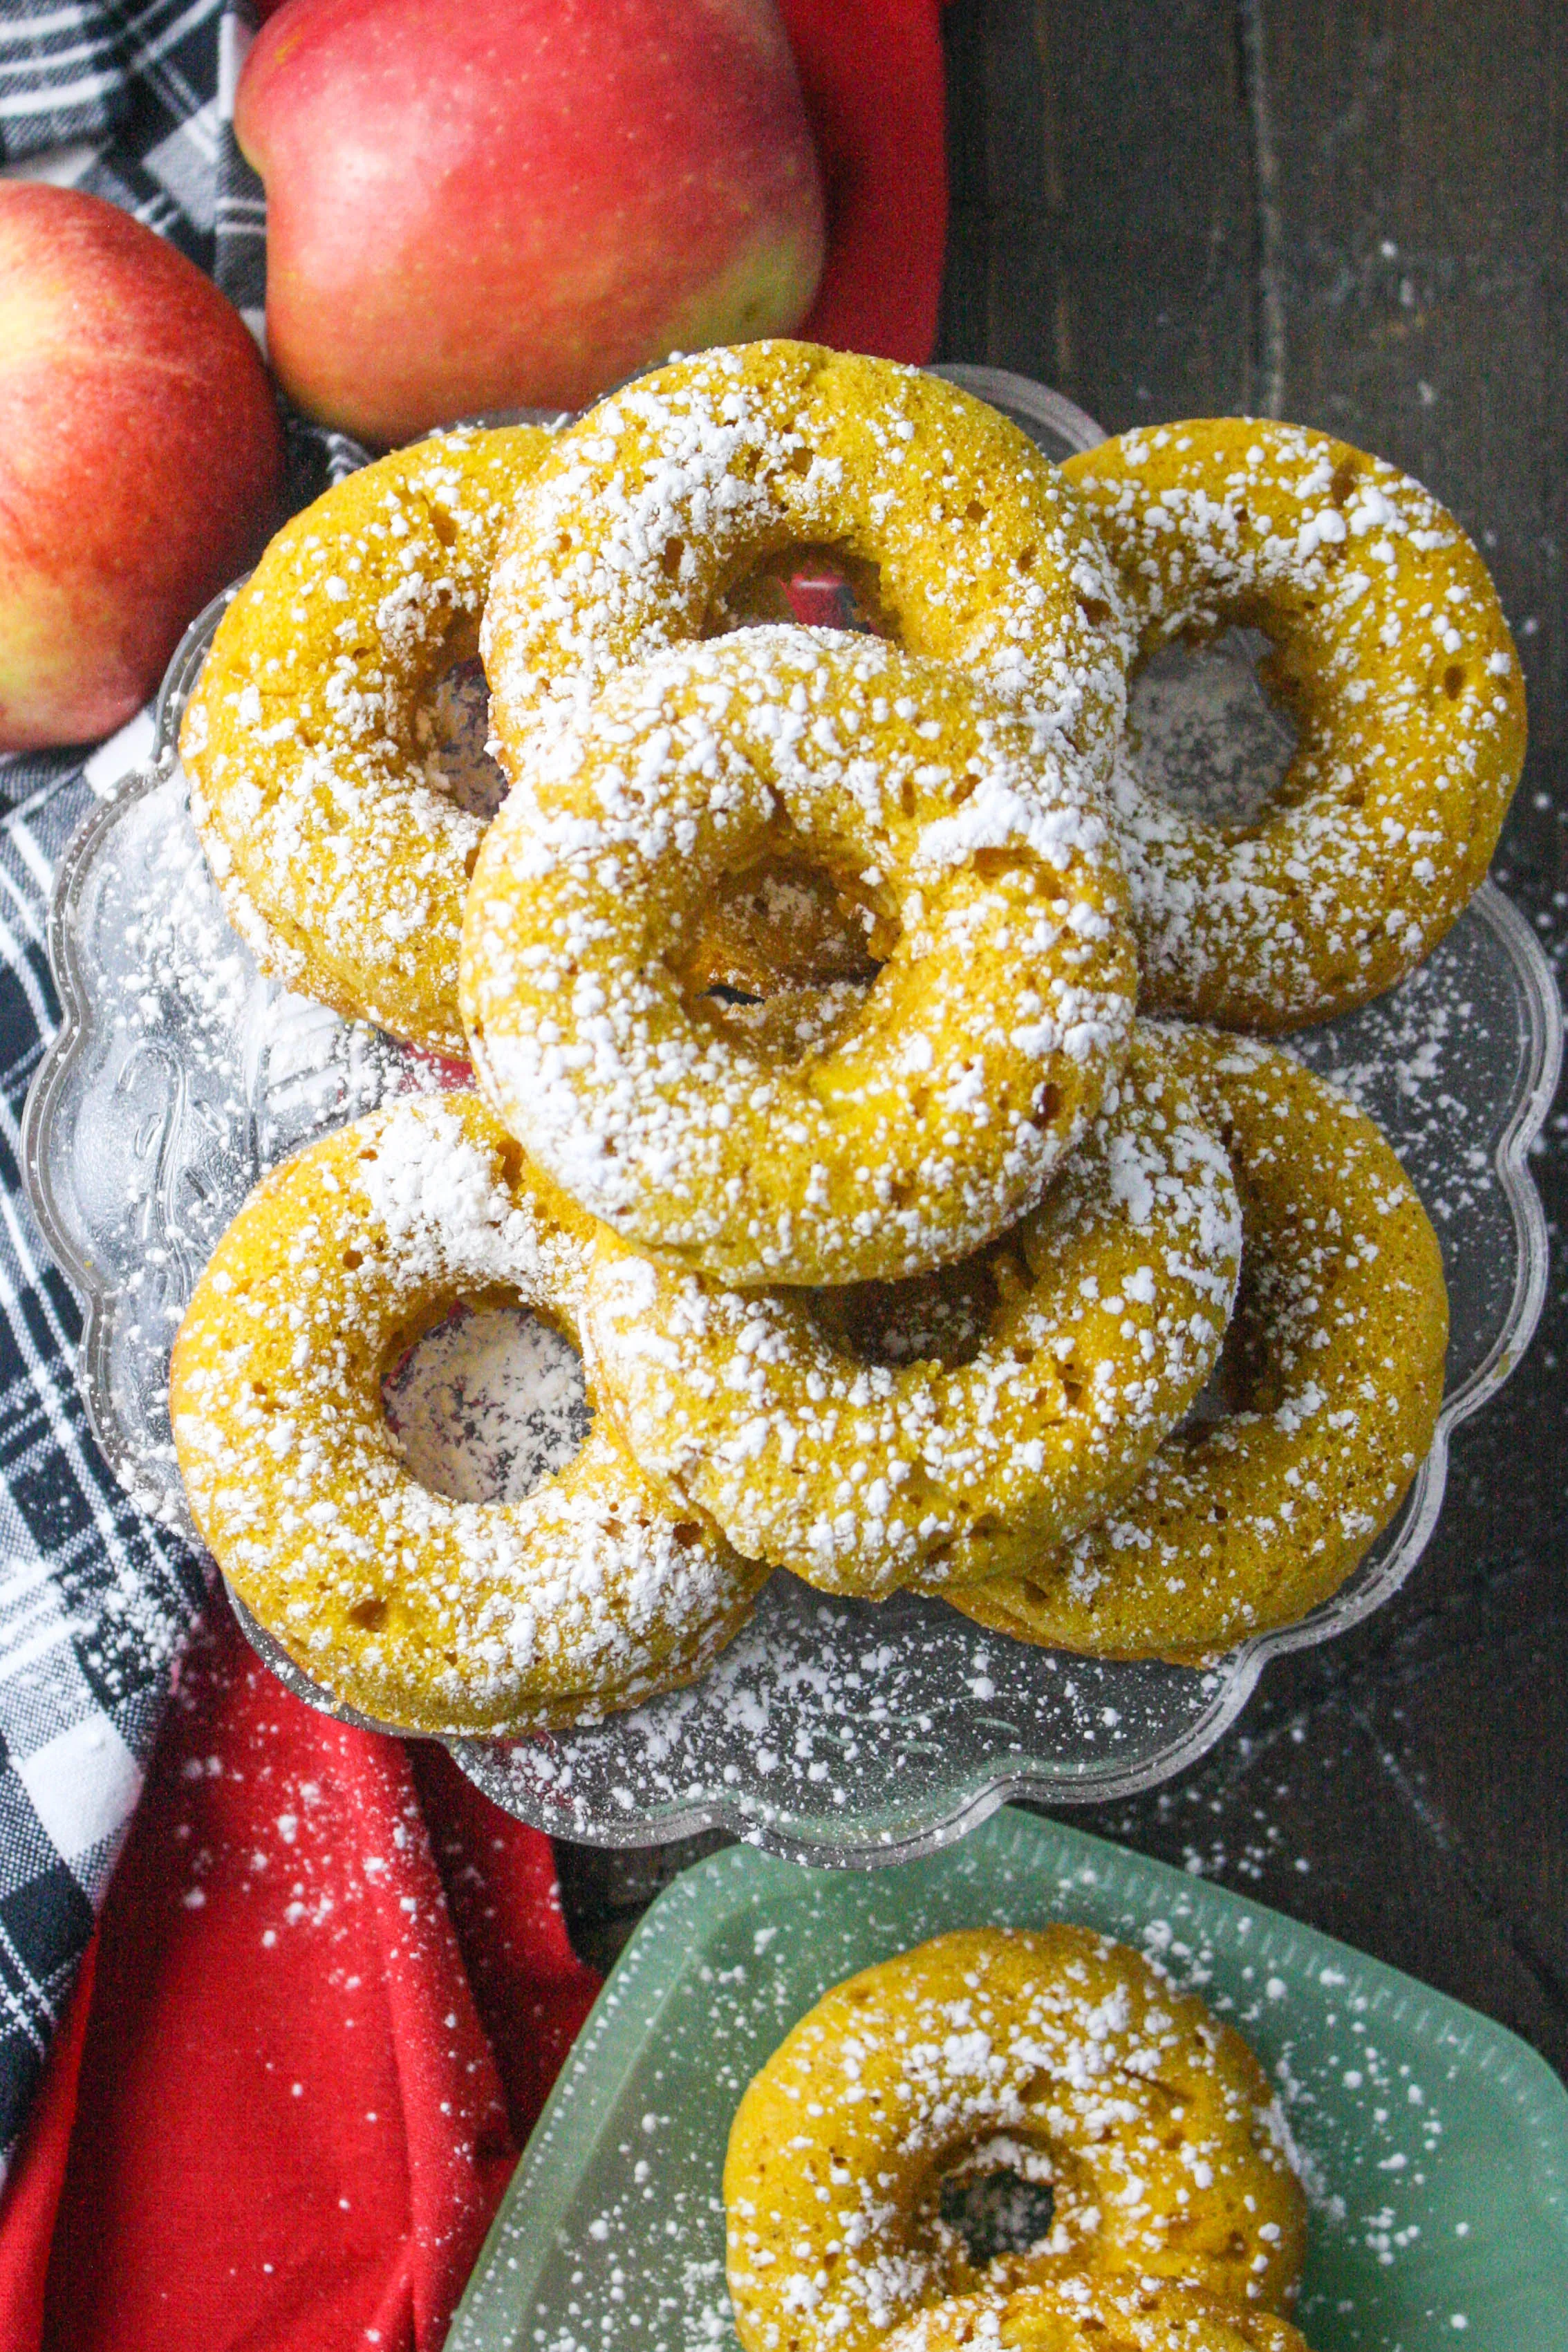 Baked Spiced Apple & Pumpkin Donuts are a wonderful treat for the season! You'll love these Baked Spiced Apple & Pumpkin Donuts!